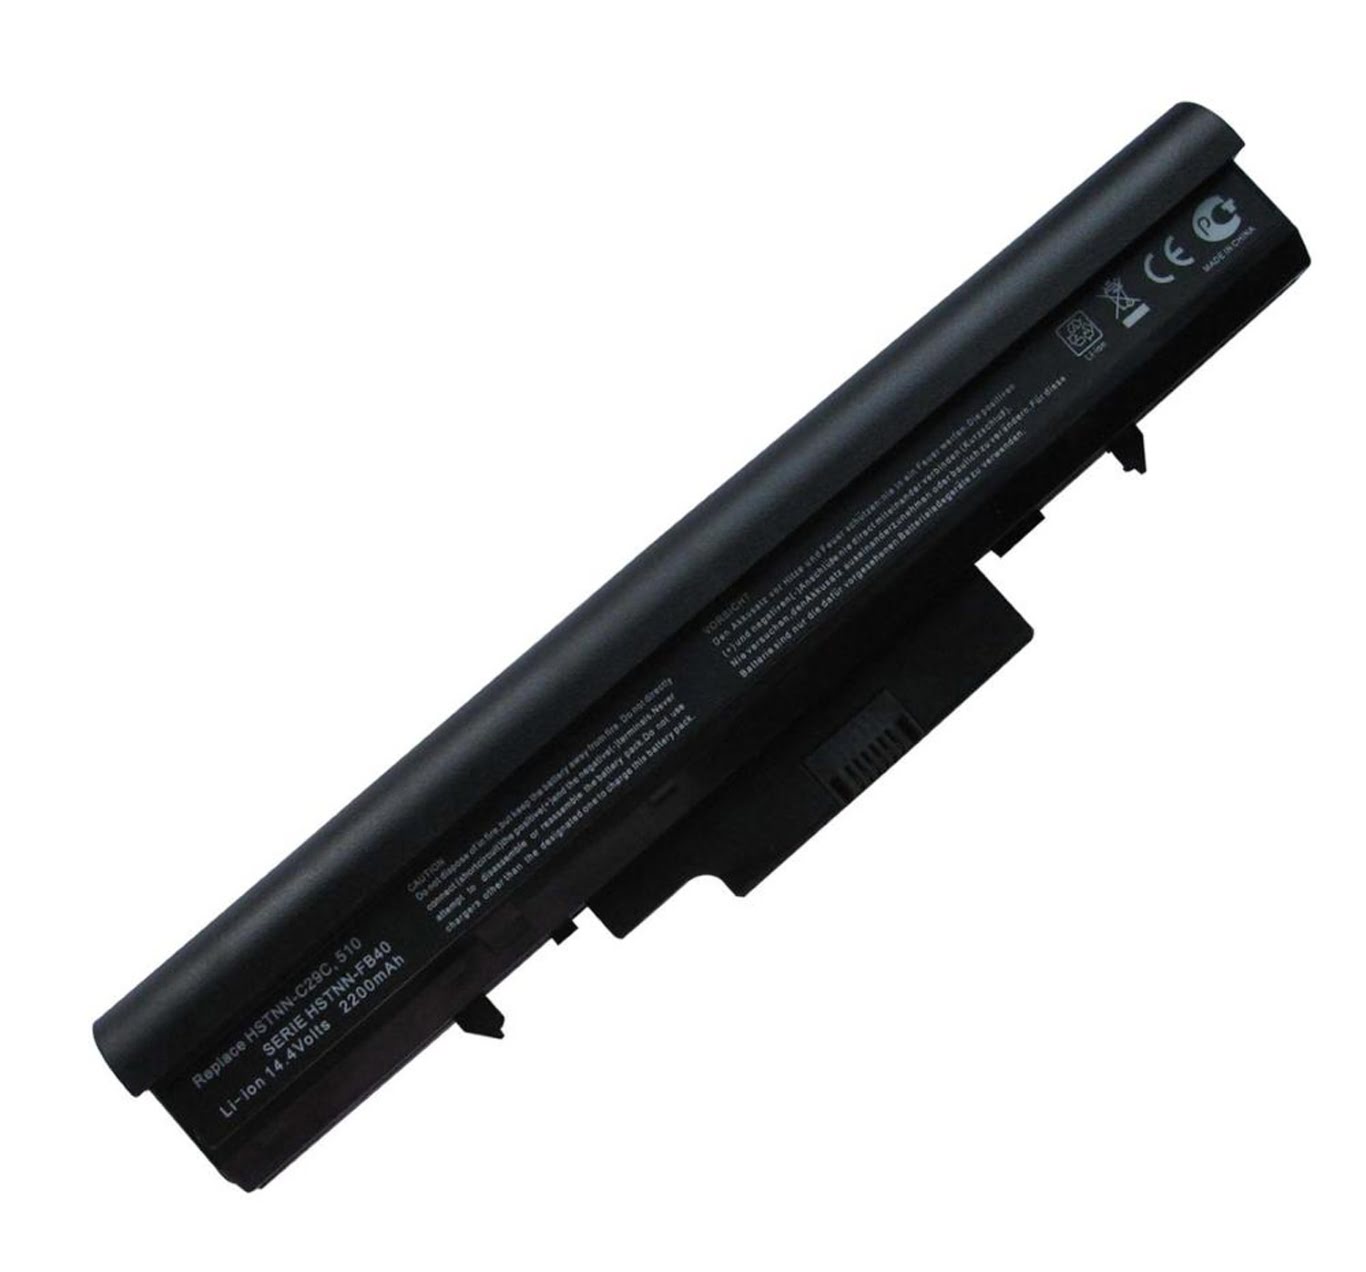 440264-ABC, 440265-ABC replacement Laptop Battery for HP 510530, 14.4V, 4 cells, 2200mAh